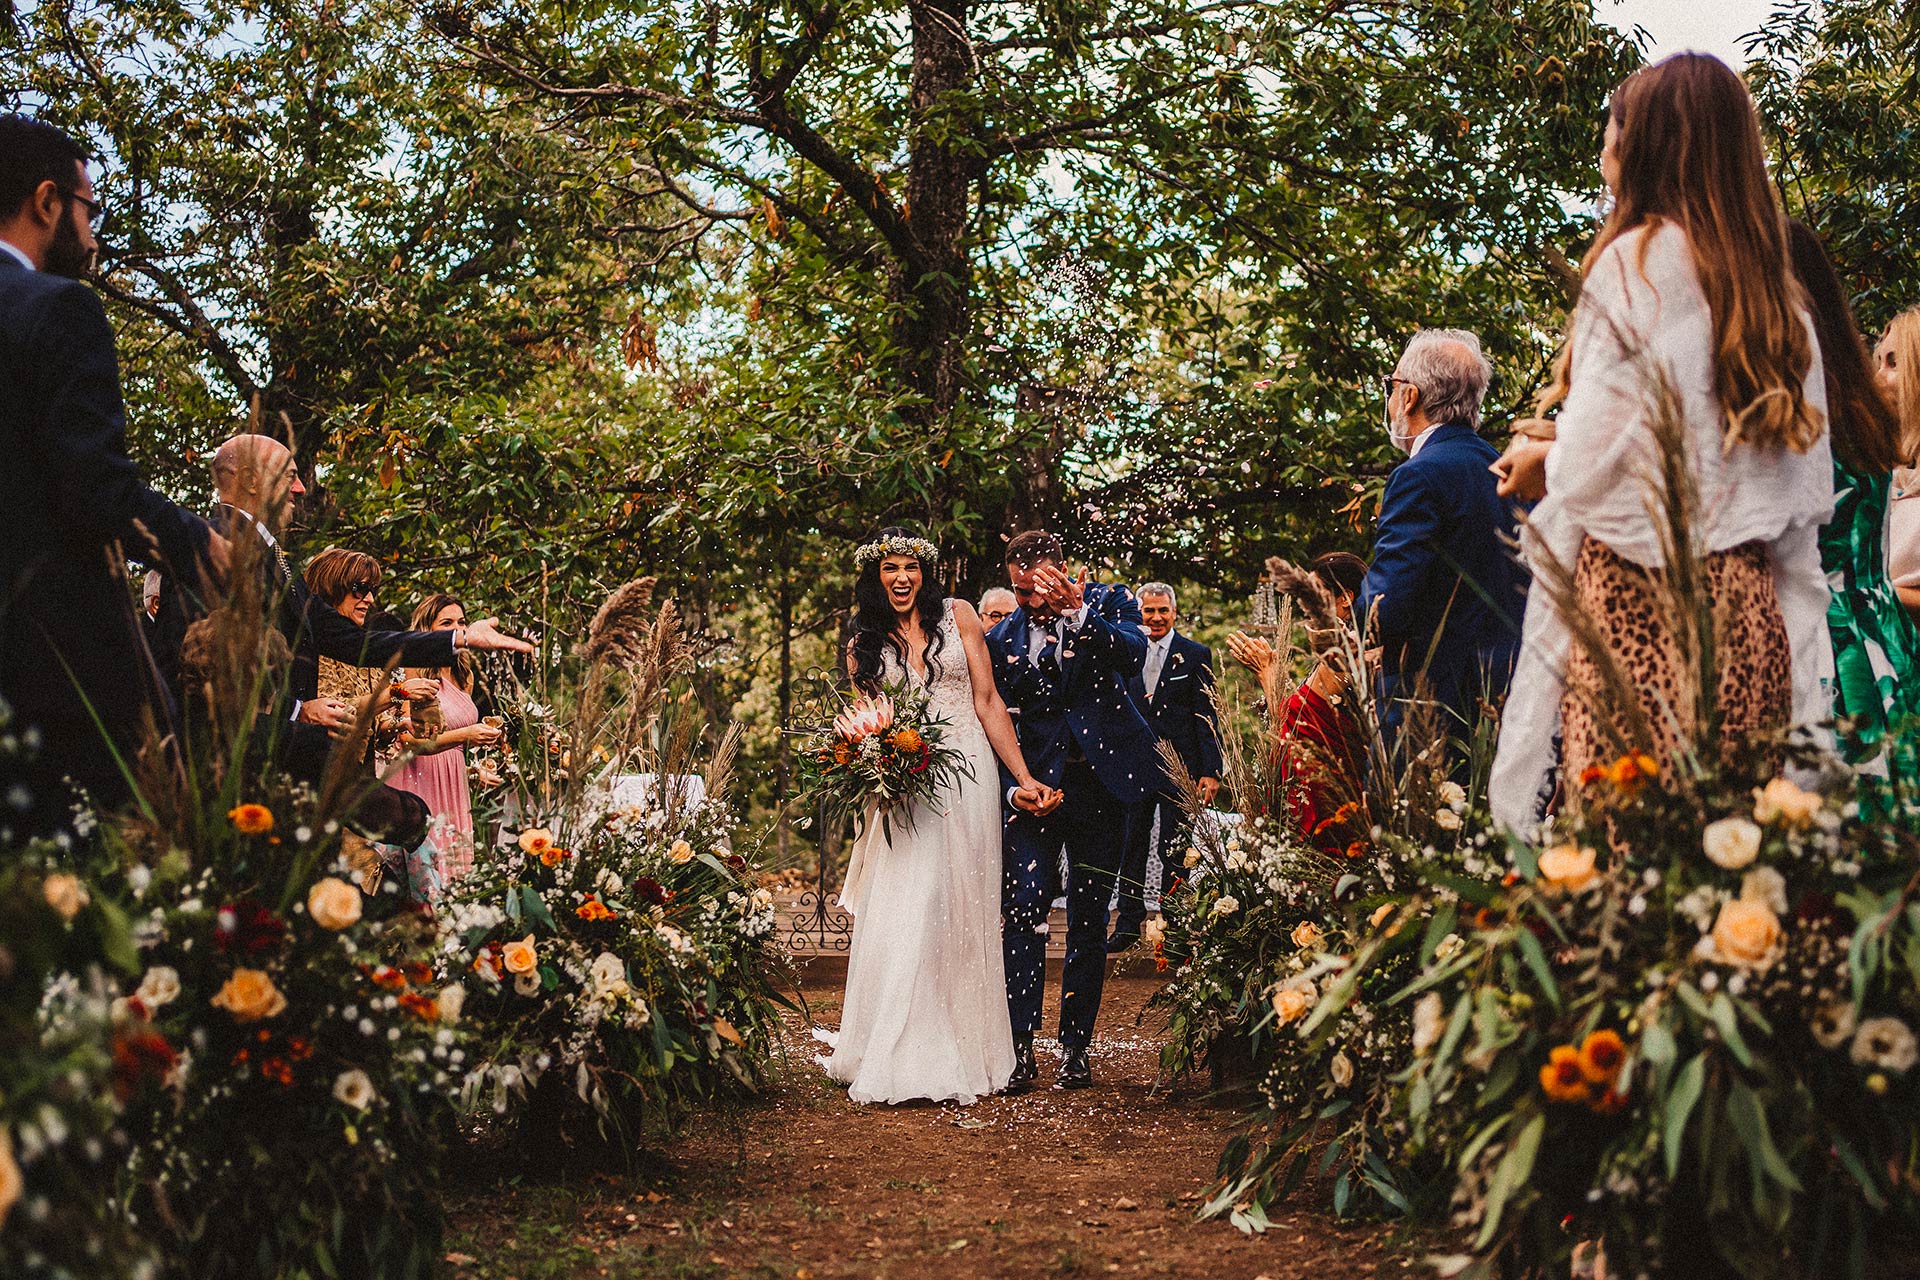 getting married in the woods